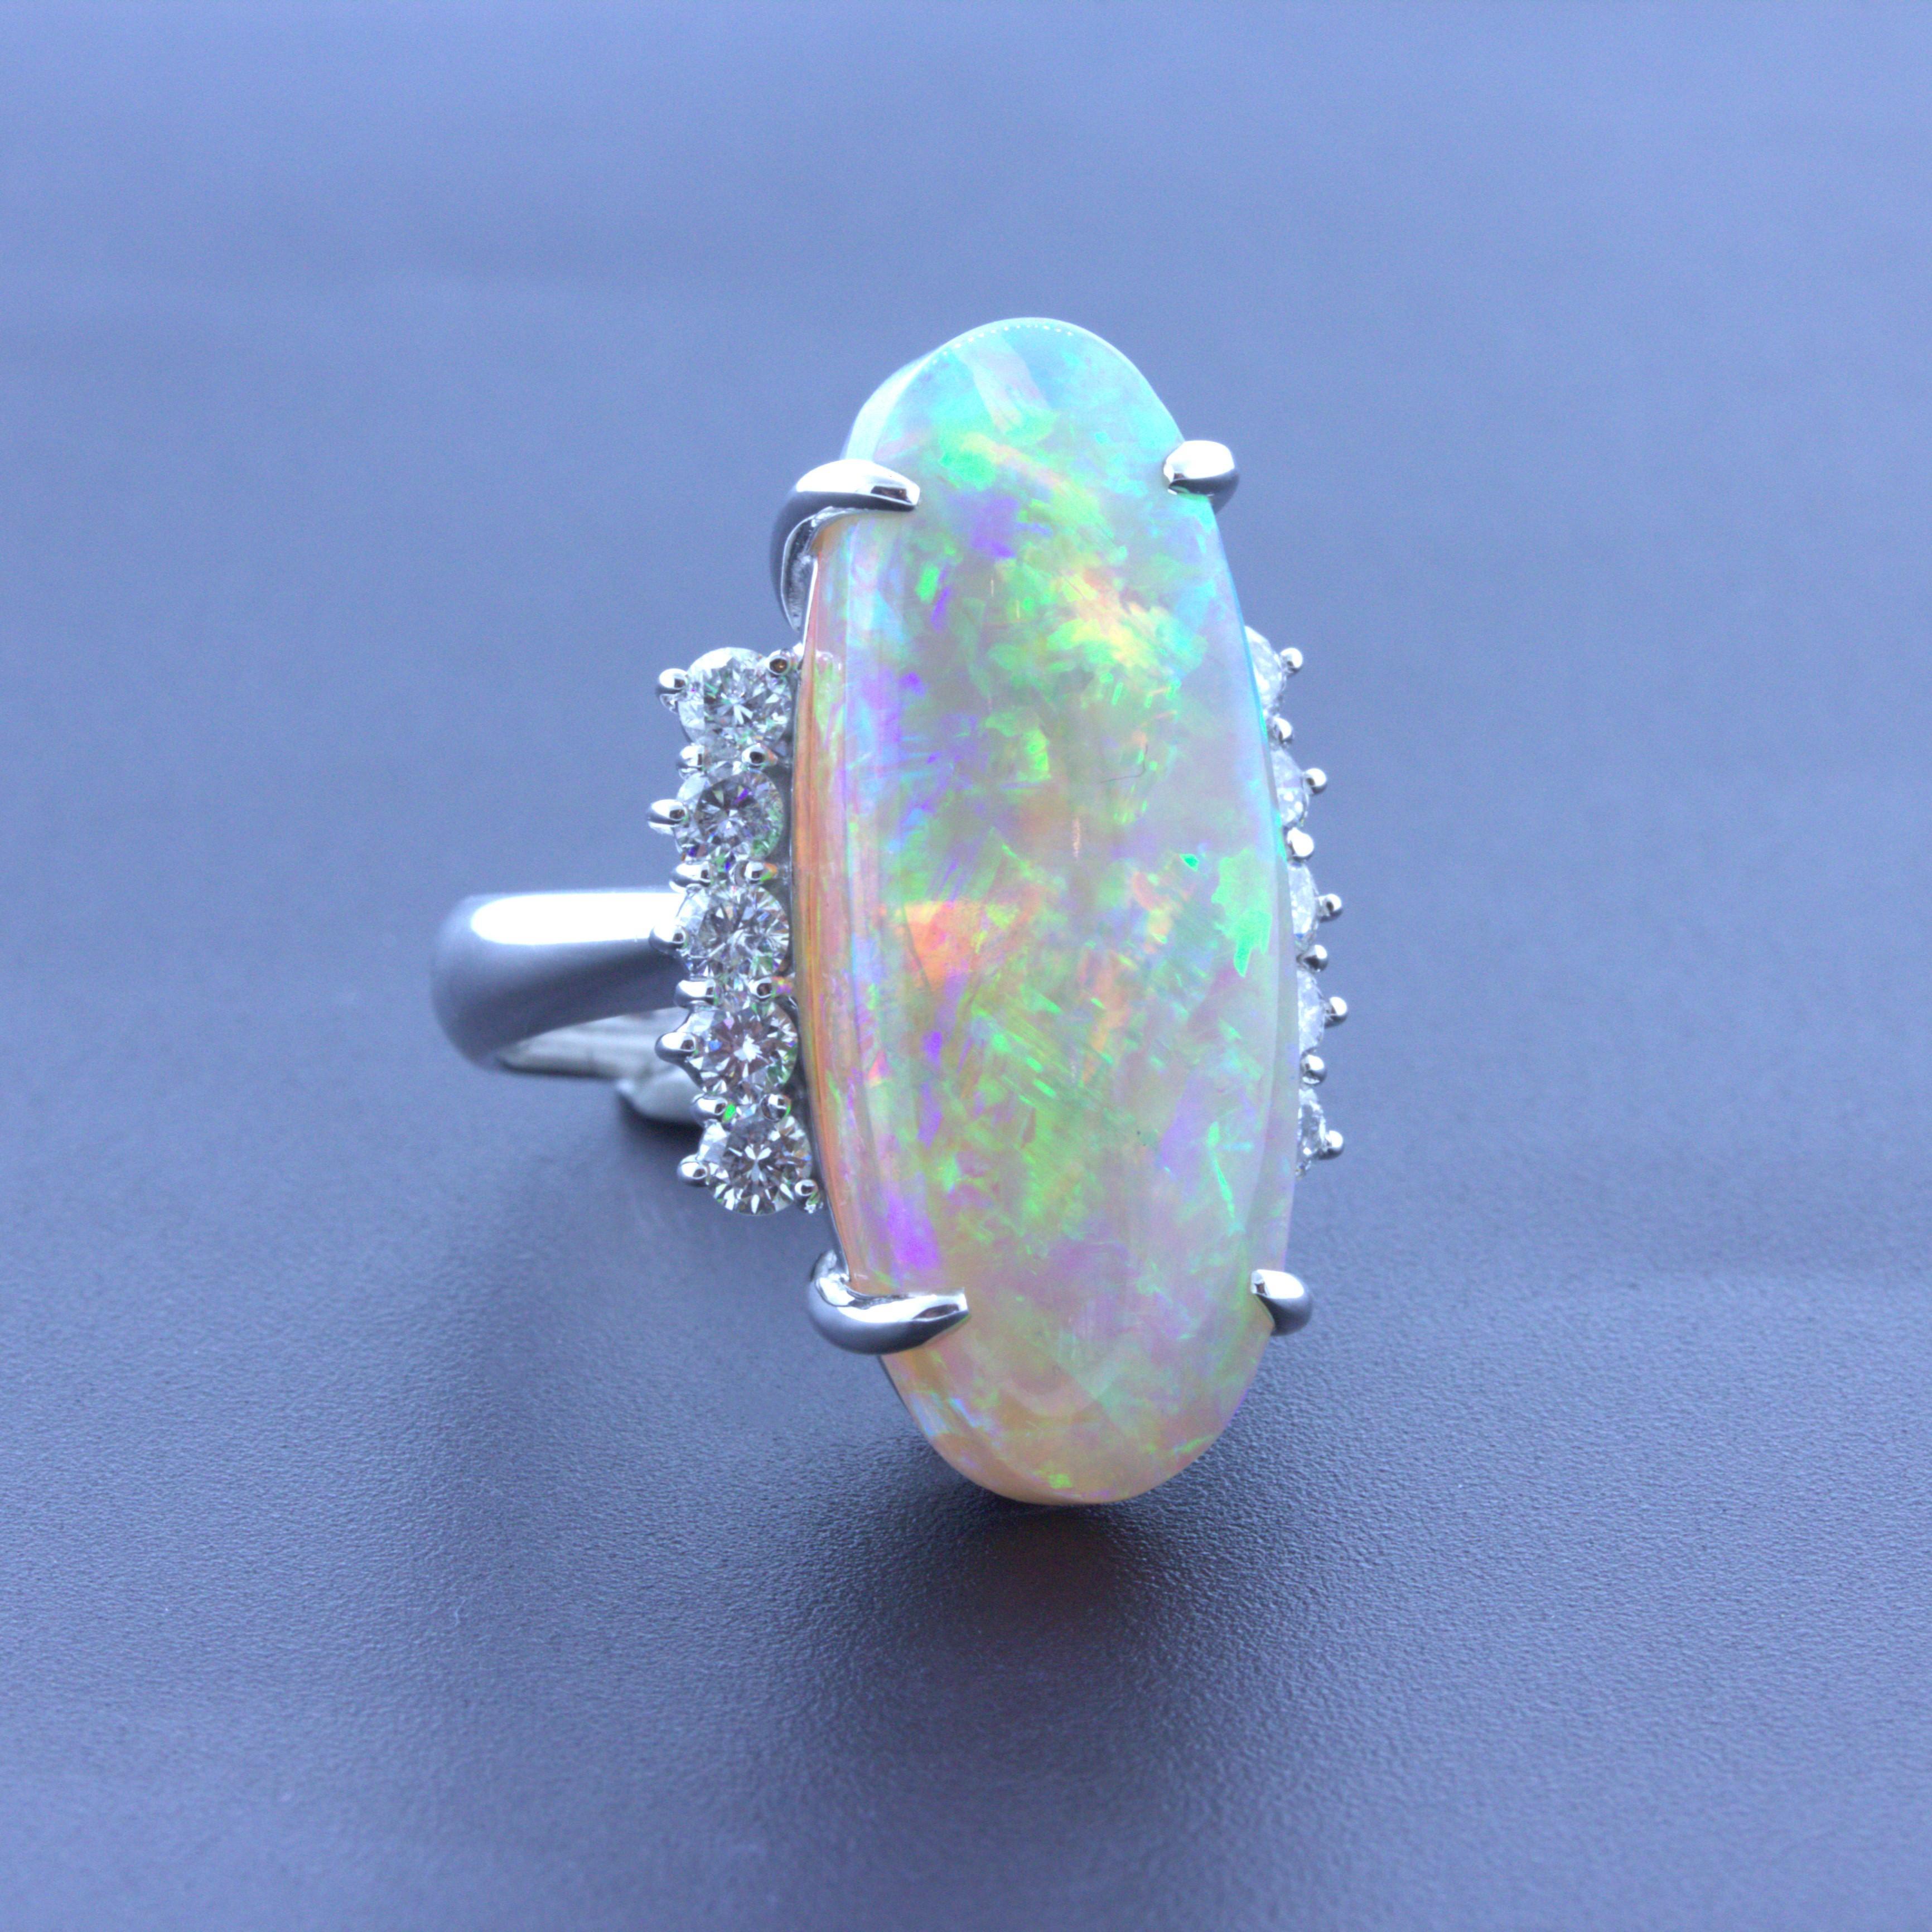 Simply stunning! This beautiful platinum ring features a large and impressive Australian opal with amazing play-of-color. The opal weighs a remarkable 15.36 carats while having incredible play-of-color as bright strong flashes of green, orange,